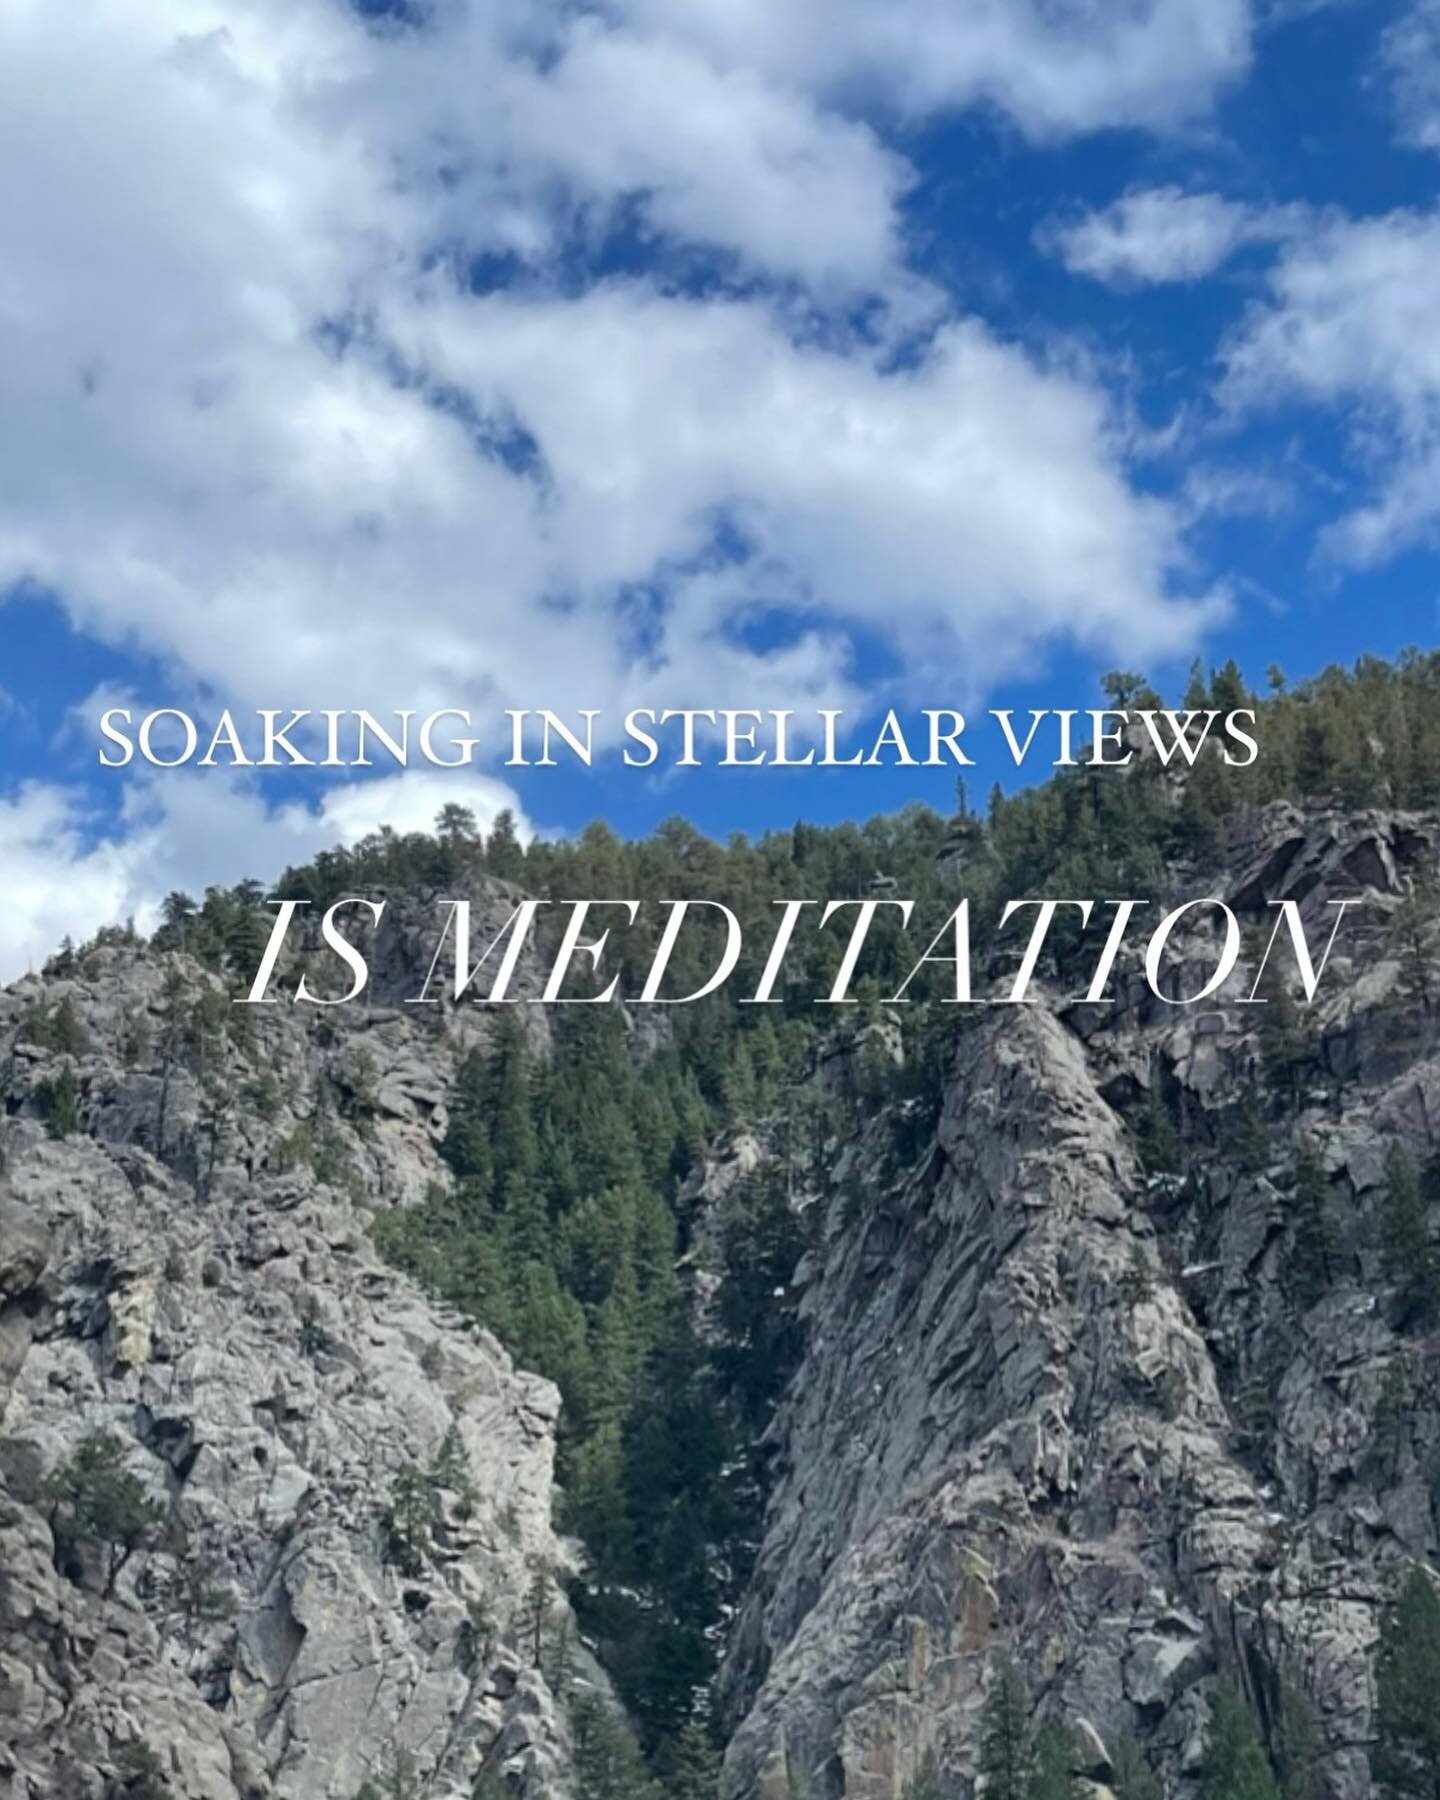 ⛰️meditation is a lot of things and, it's 𝘯𝘰𝘵 ... ⁣
⁣
meditation is that place, the &quot;result&quot; of whatever practice or action or awareness of _____ .⁣
⁣
one such practice can be soaking in things like viewing or feeling spectacular scenery